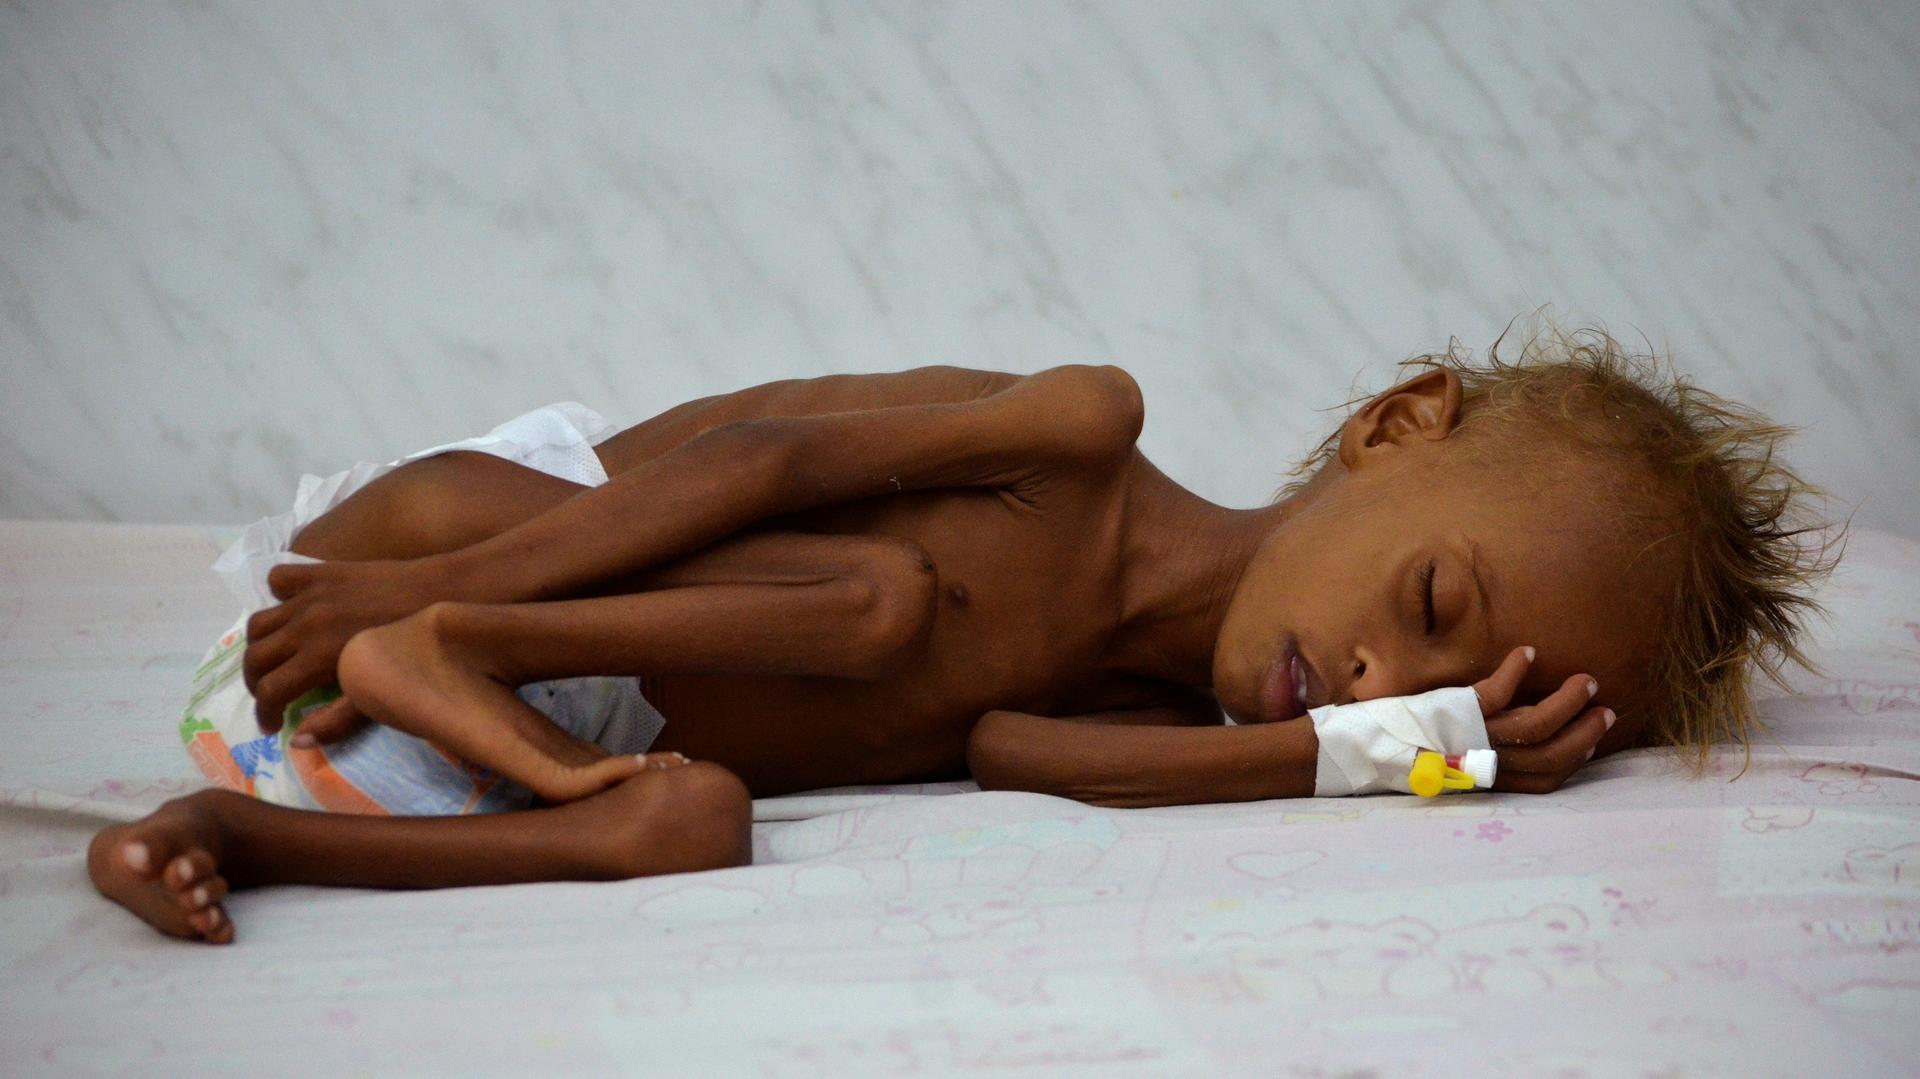 Salem Abdullah Musabih, 6, lies on a bed at a malnutrition intensive care unit at a hospital in the Red Sea port city of Hodaida, Yemen, Sept. 11, 2016. Millions of Yemenis face food shortages and the threat of famine after more than two years of civil wa